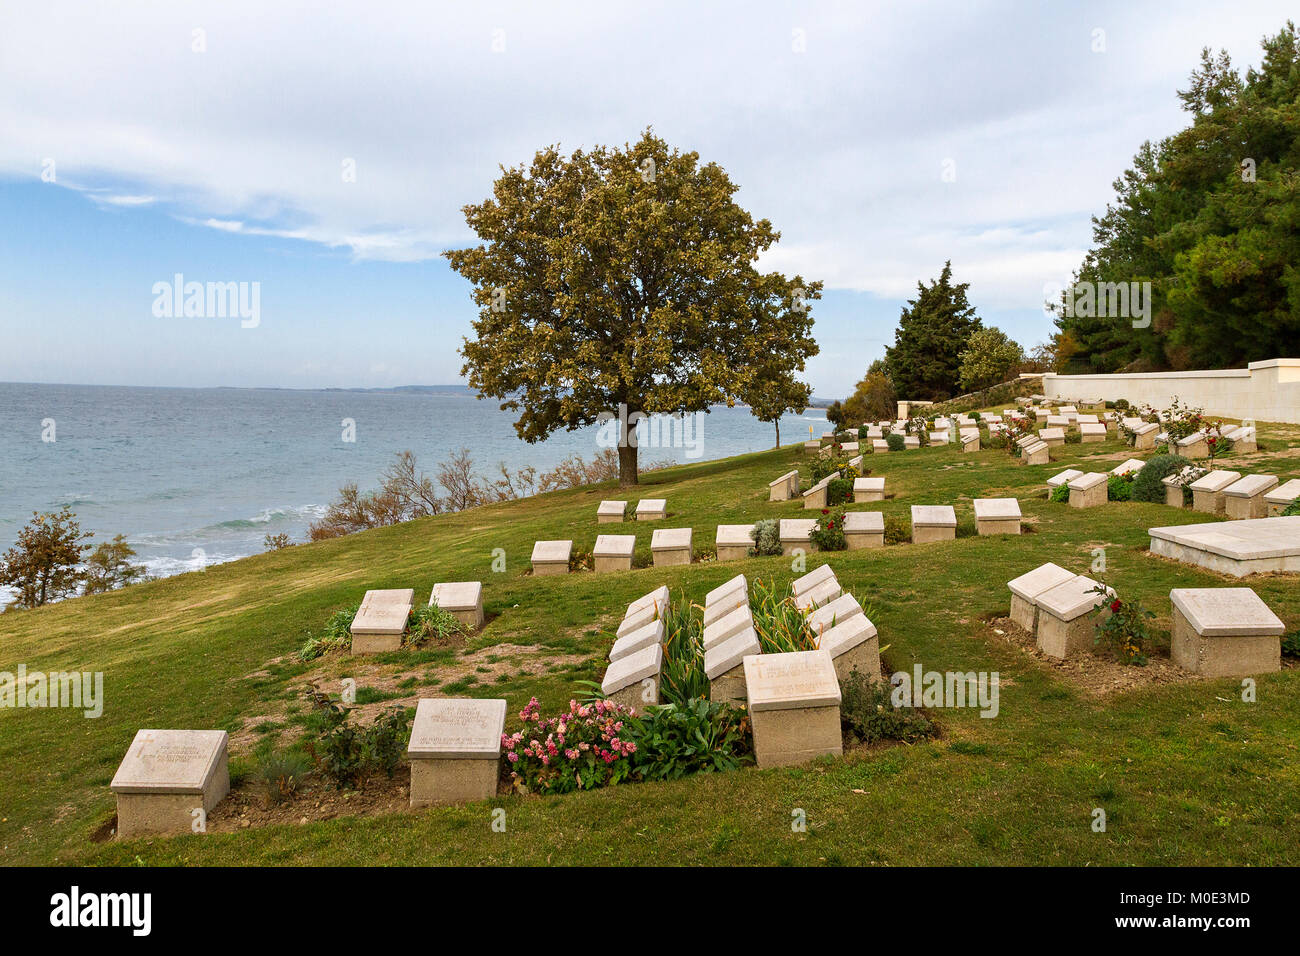 Beach Cemetery at the Anzac Cove, Gallipoli, Canakkale, Turkey, which contains the remains of allied troops who died during the Battle of Gallipoli. Stock Photo